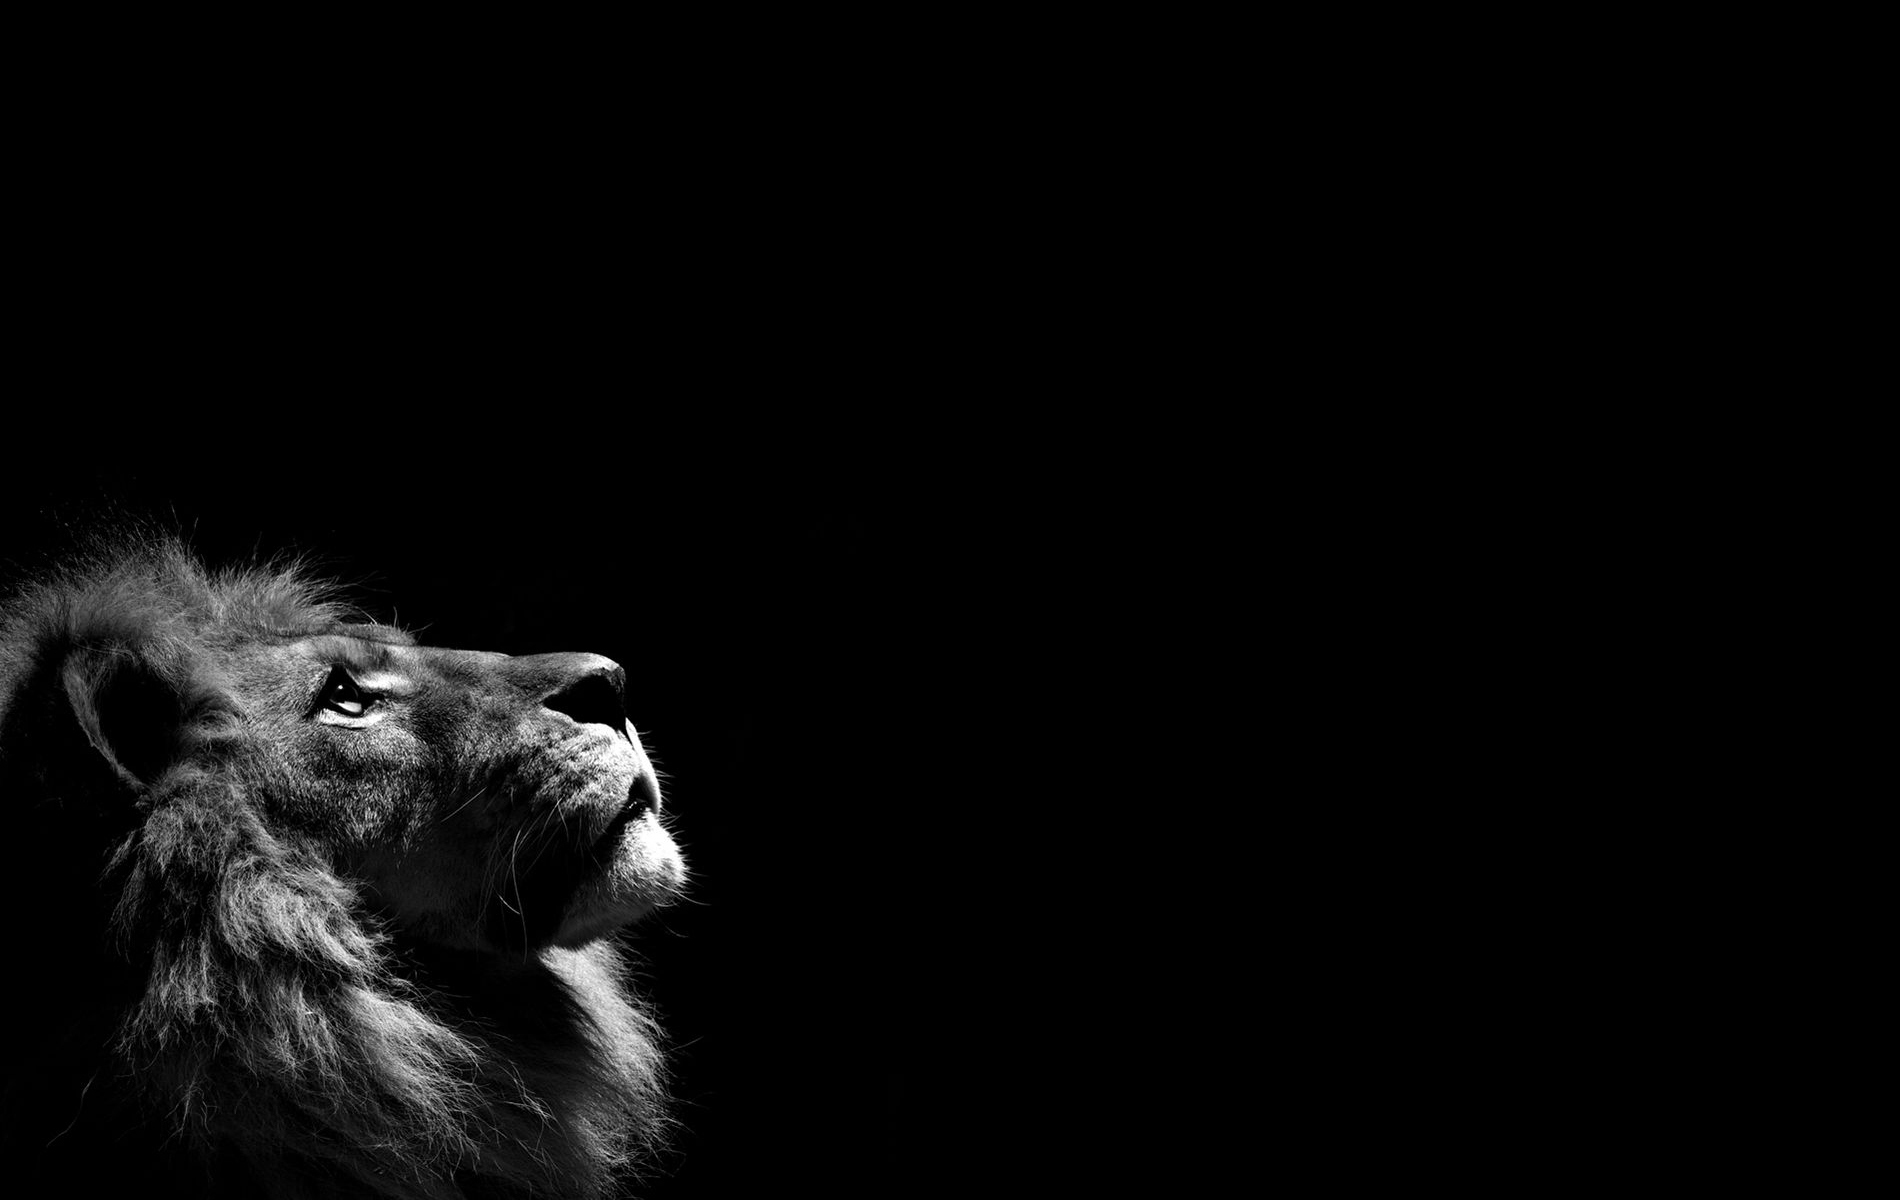 Wallpaper Backgrounds on Black Background Lion Profile Hd Wallpaper Of Wild Animal   Reptiles